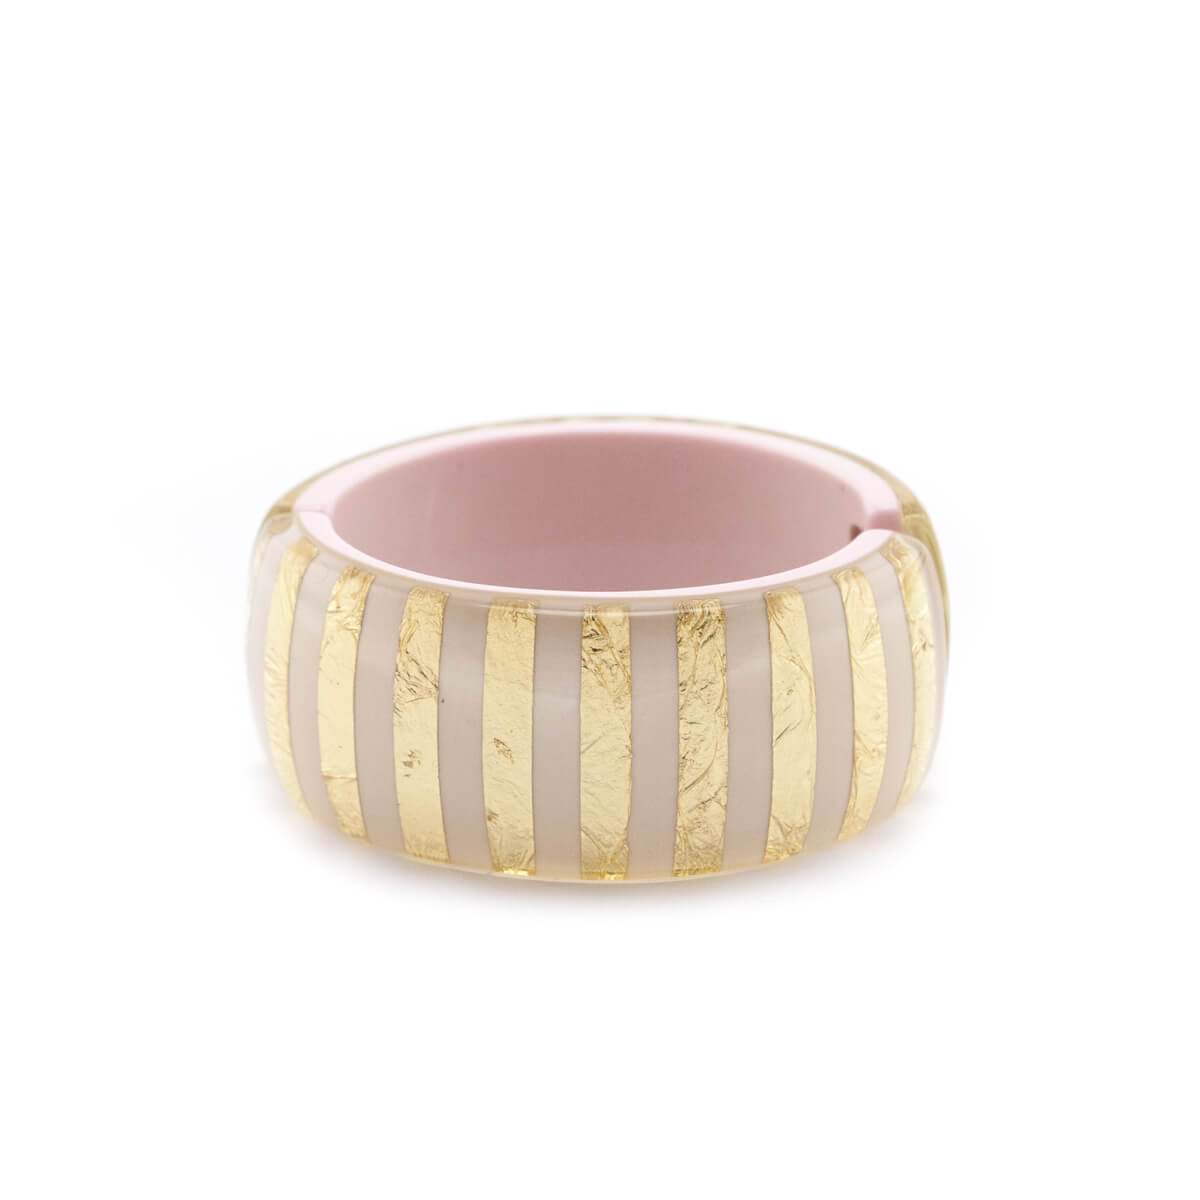 Search results for: 'Chanel bangle'